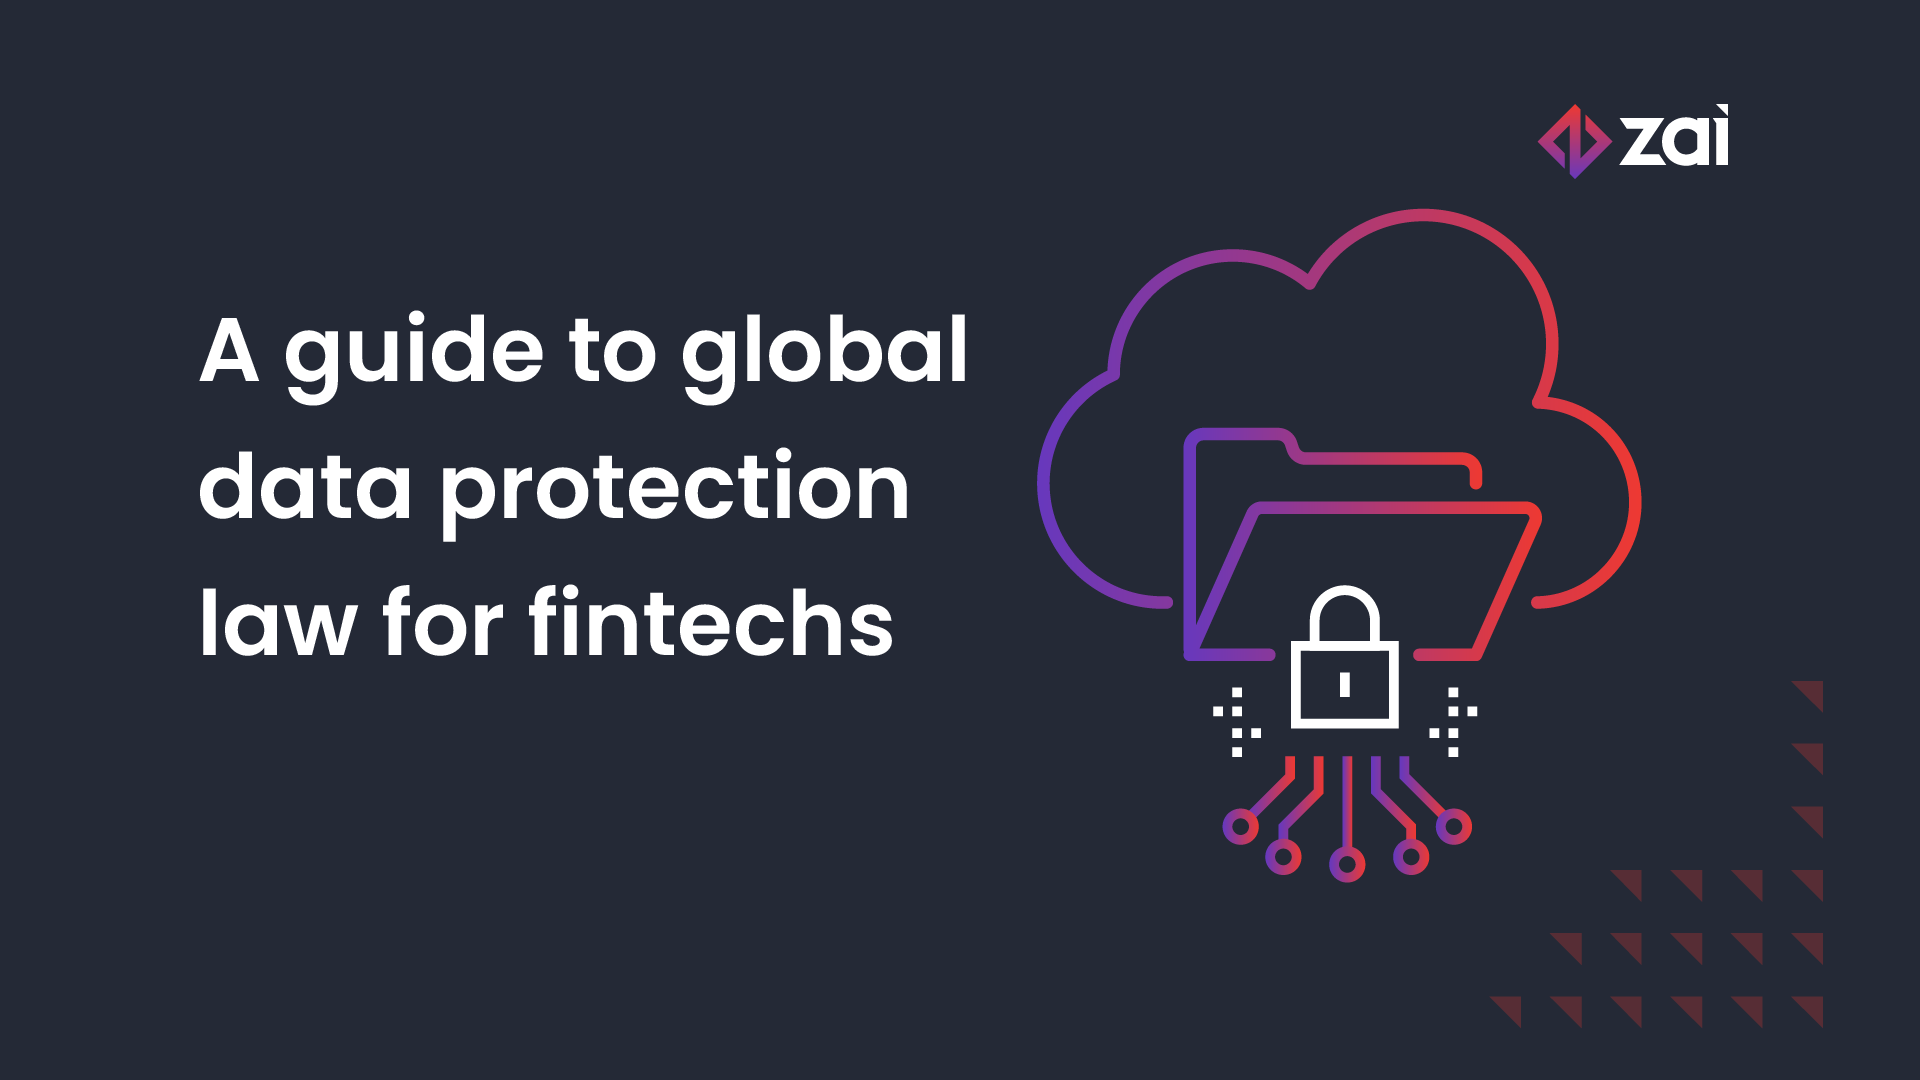 Fintechs and data protection: make sure your business is protected